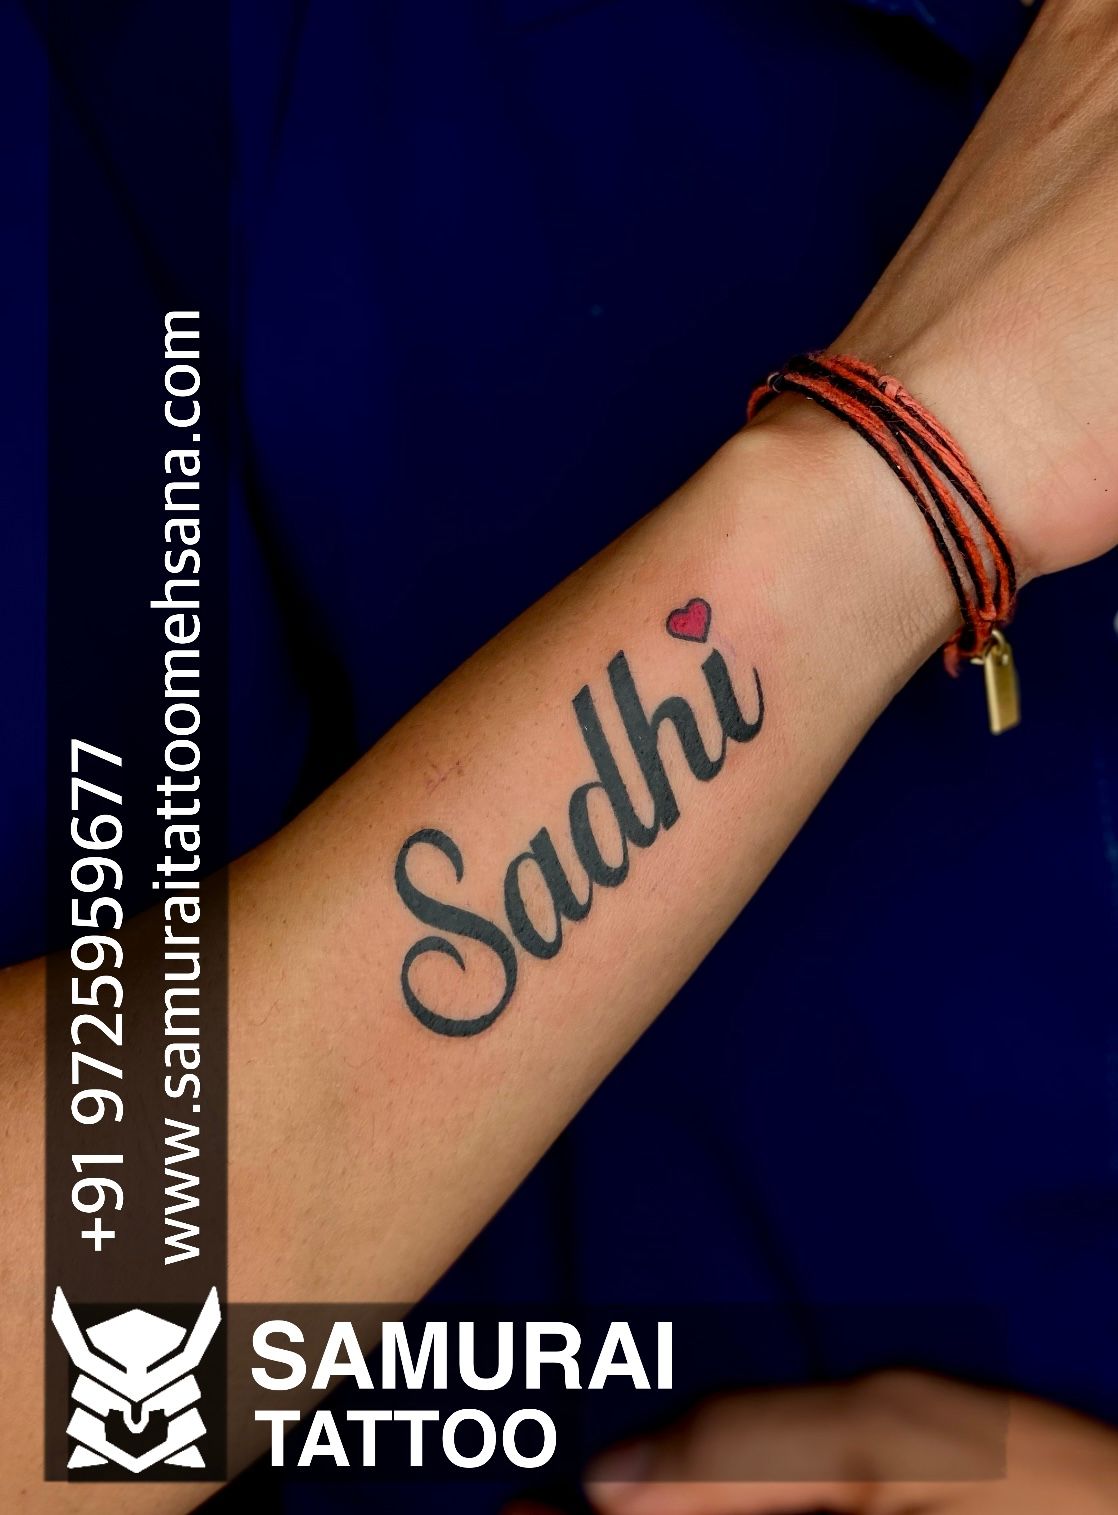 Tattoo uploaded by Vipul Chaudhary • div name tattoo |Div tattoo |Div name  tattoo ideas • Tattoodo